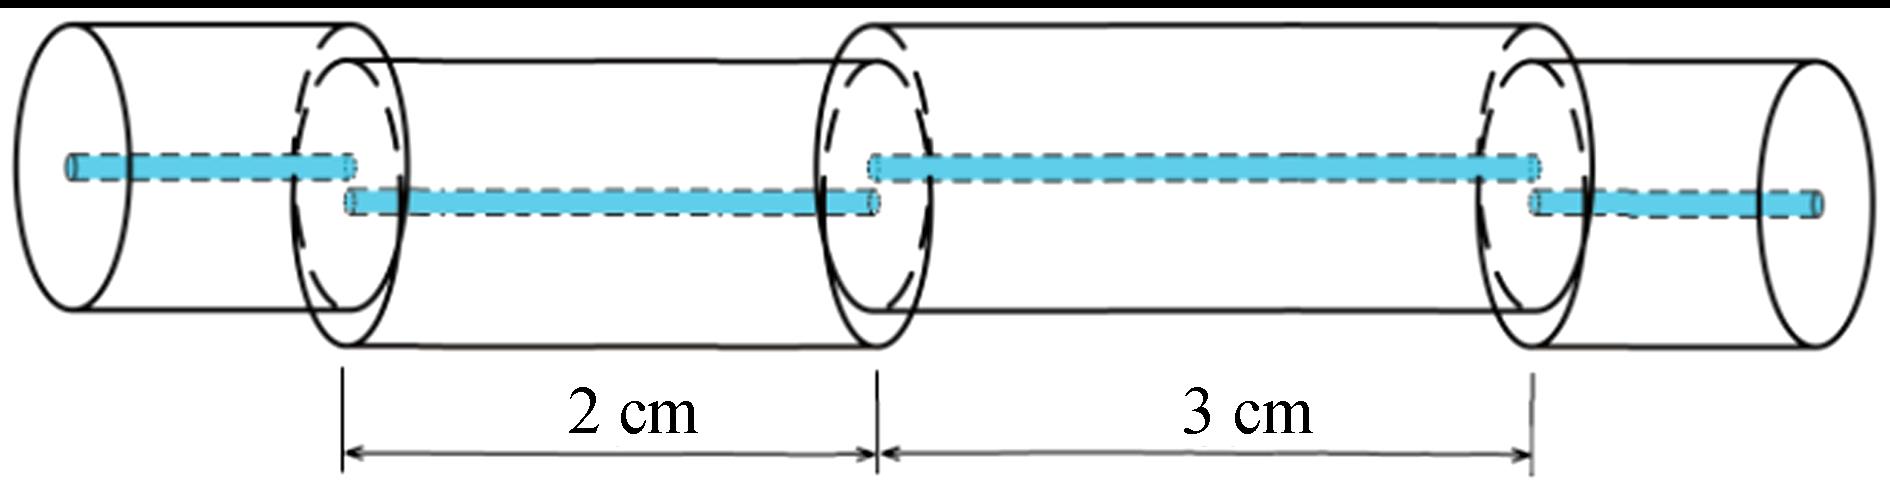 The schematic diagram of the three-stage cascaded M-Z sensor with misaligned structure